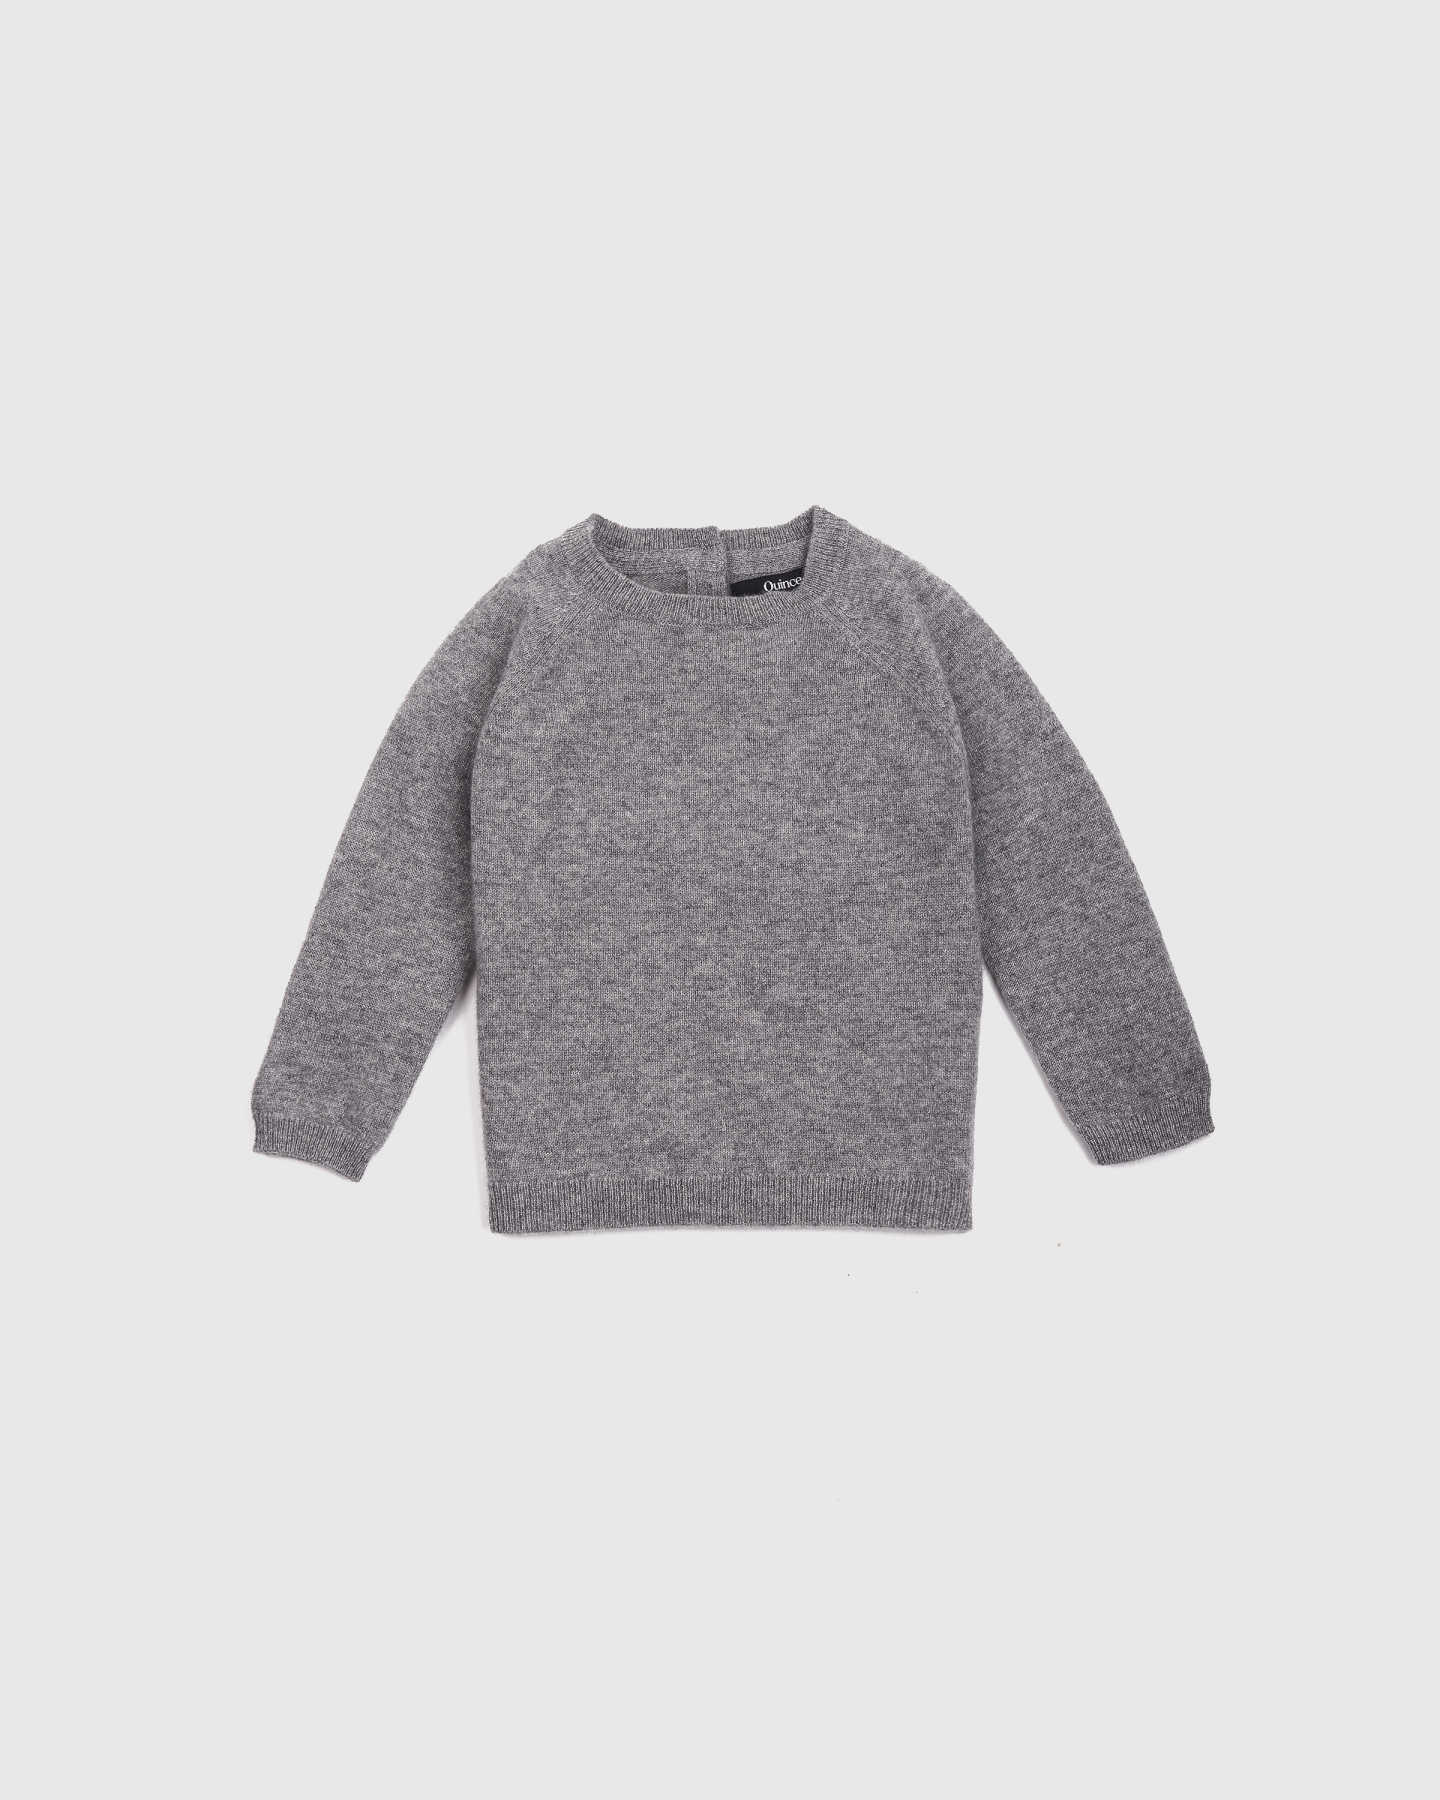 You May Also Like - Mongolian Cashmere Crew Neck Sweater - Baby Gender Neutral - Heather Grey